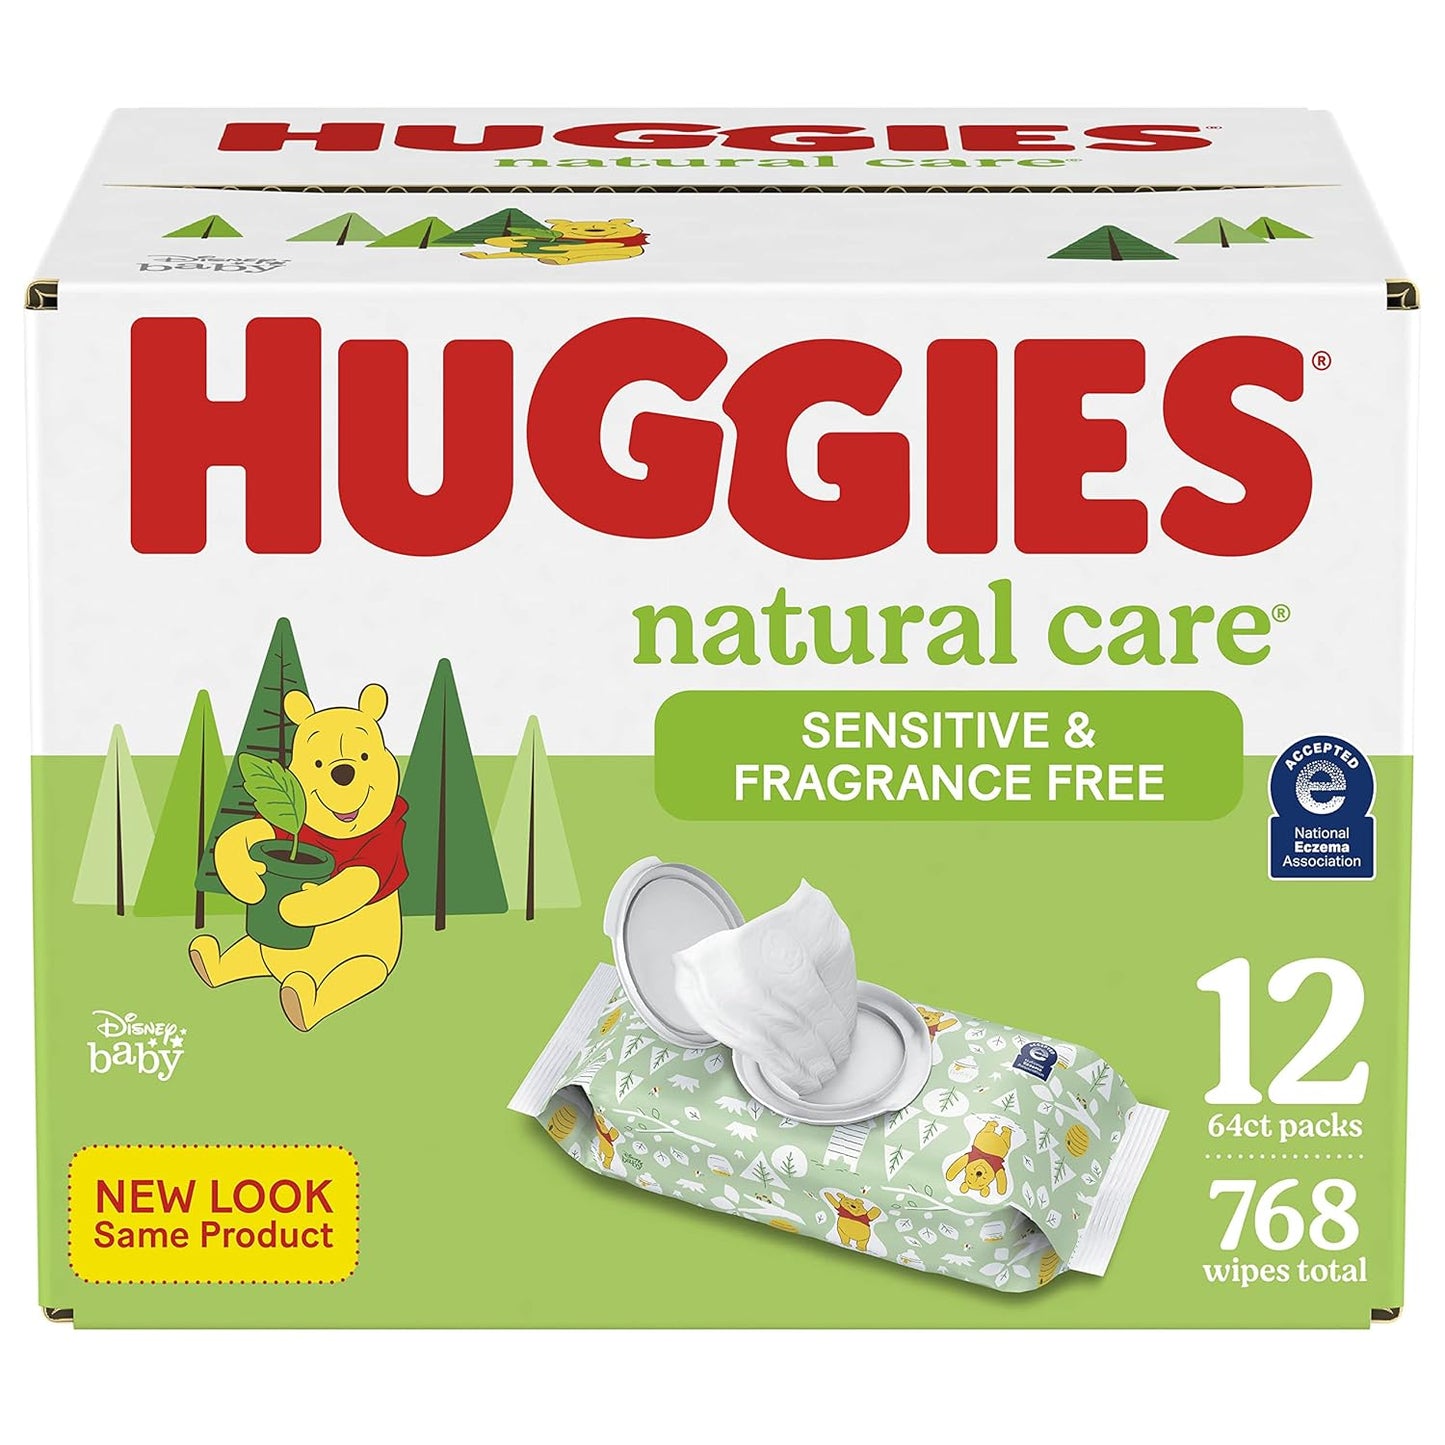 Uniites™, Huggies Natural Care Sensitive Baby Wipes, Unscented, Hypoallergenic, 99% Purified Water, 12 Flip-Top Packs (768 Wipes Total),  $22.91